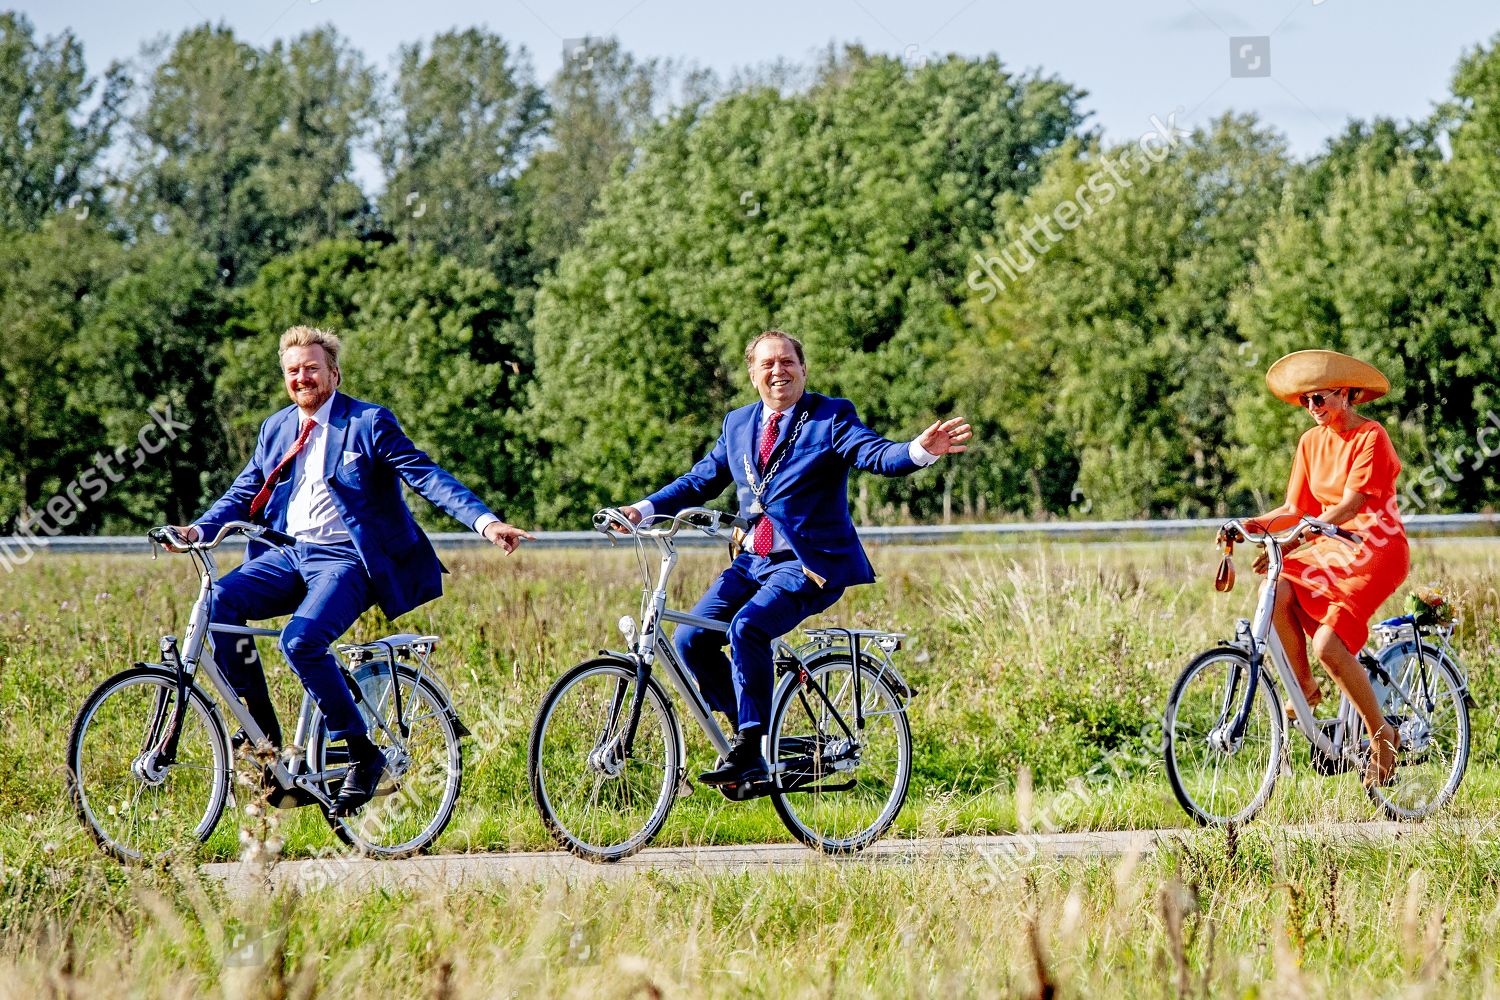 king-willem-alexander-and-queen-maxima-visit-to-ooststellingwerf-the-netherlands-shutterstock-editorial-10779750l.jpg